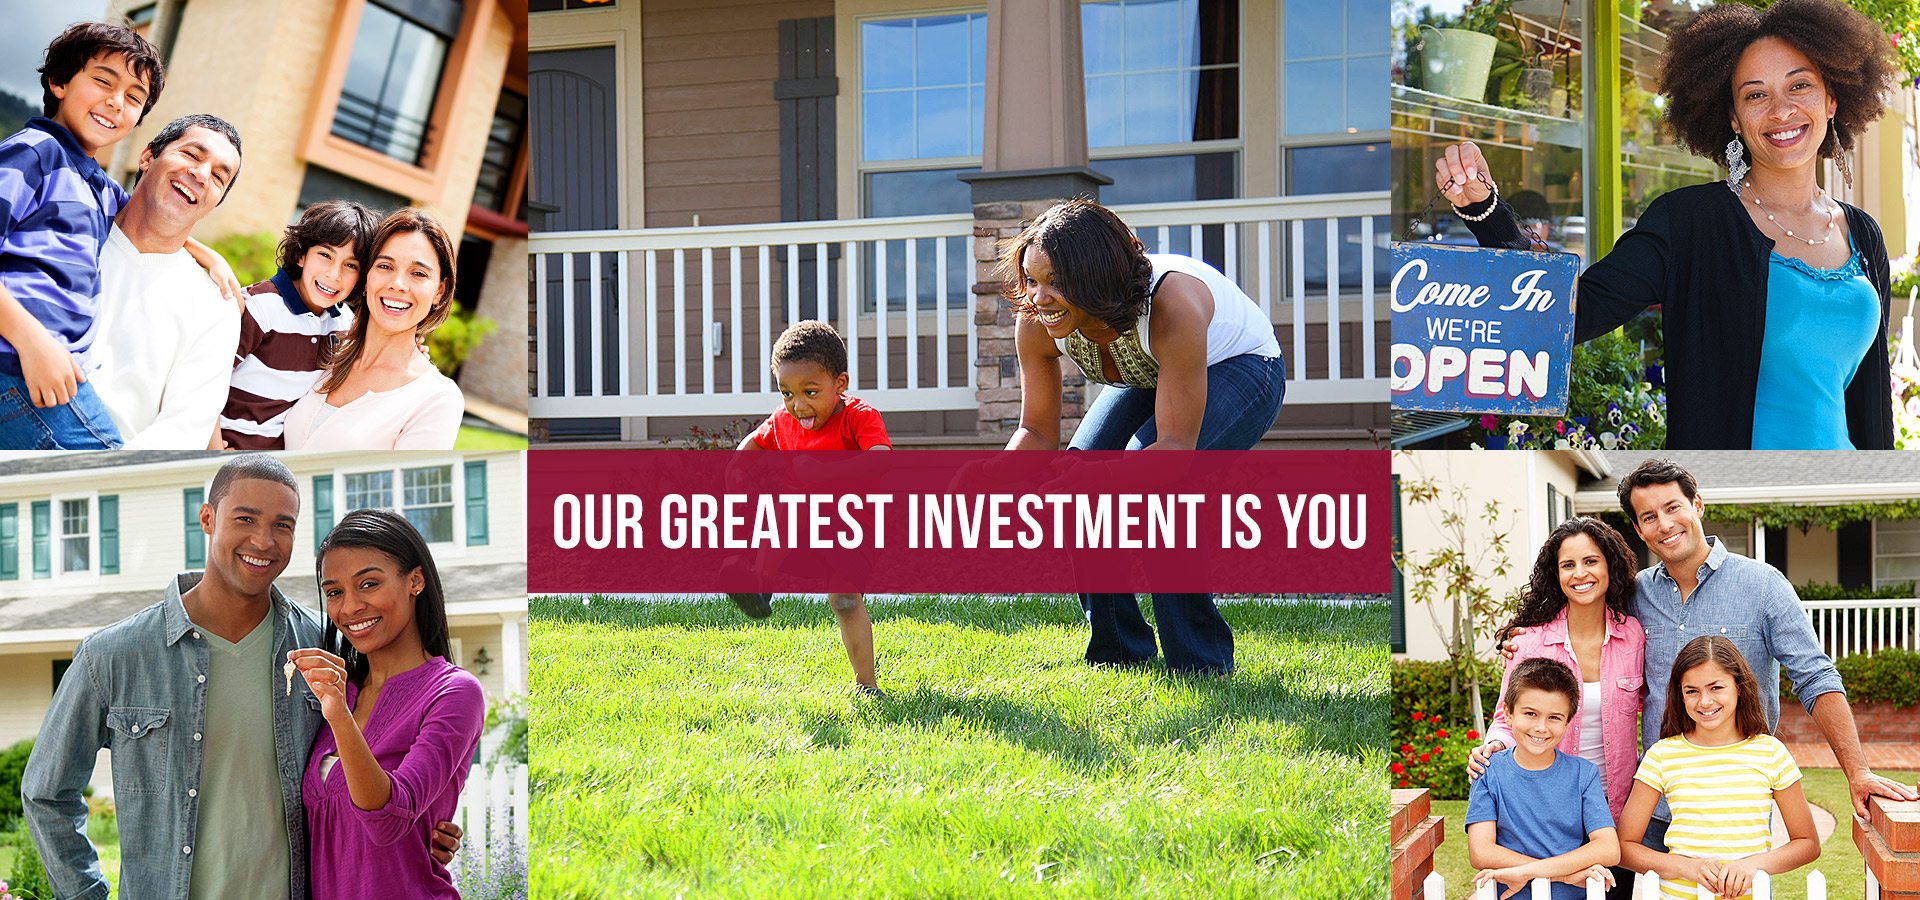 Our Greatest Investment Is You